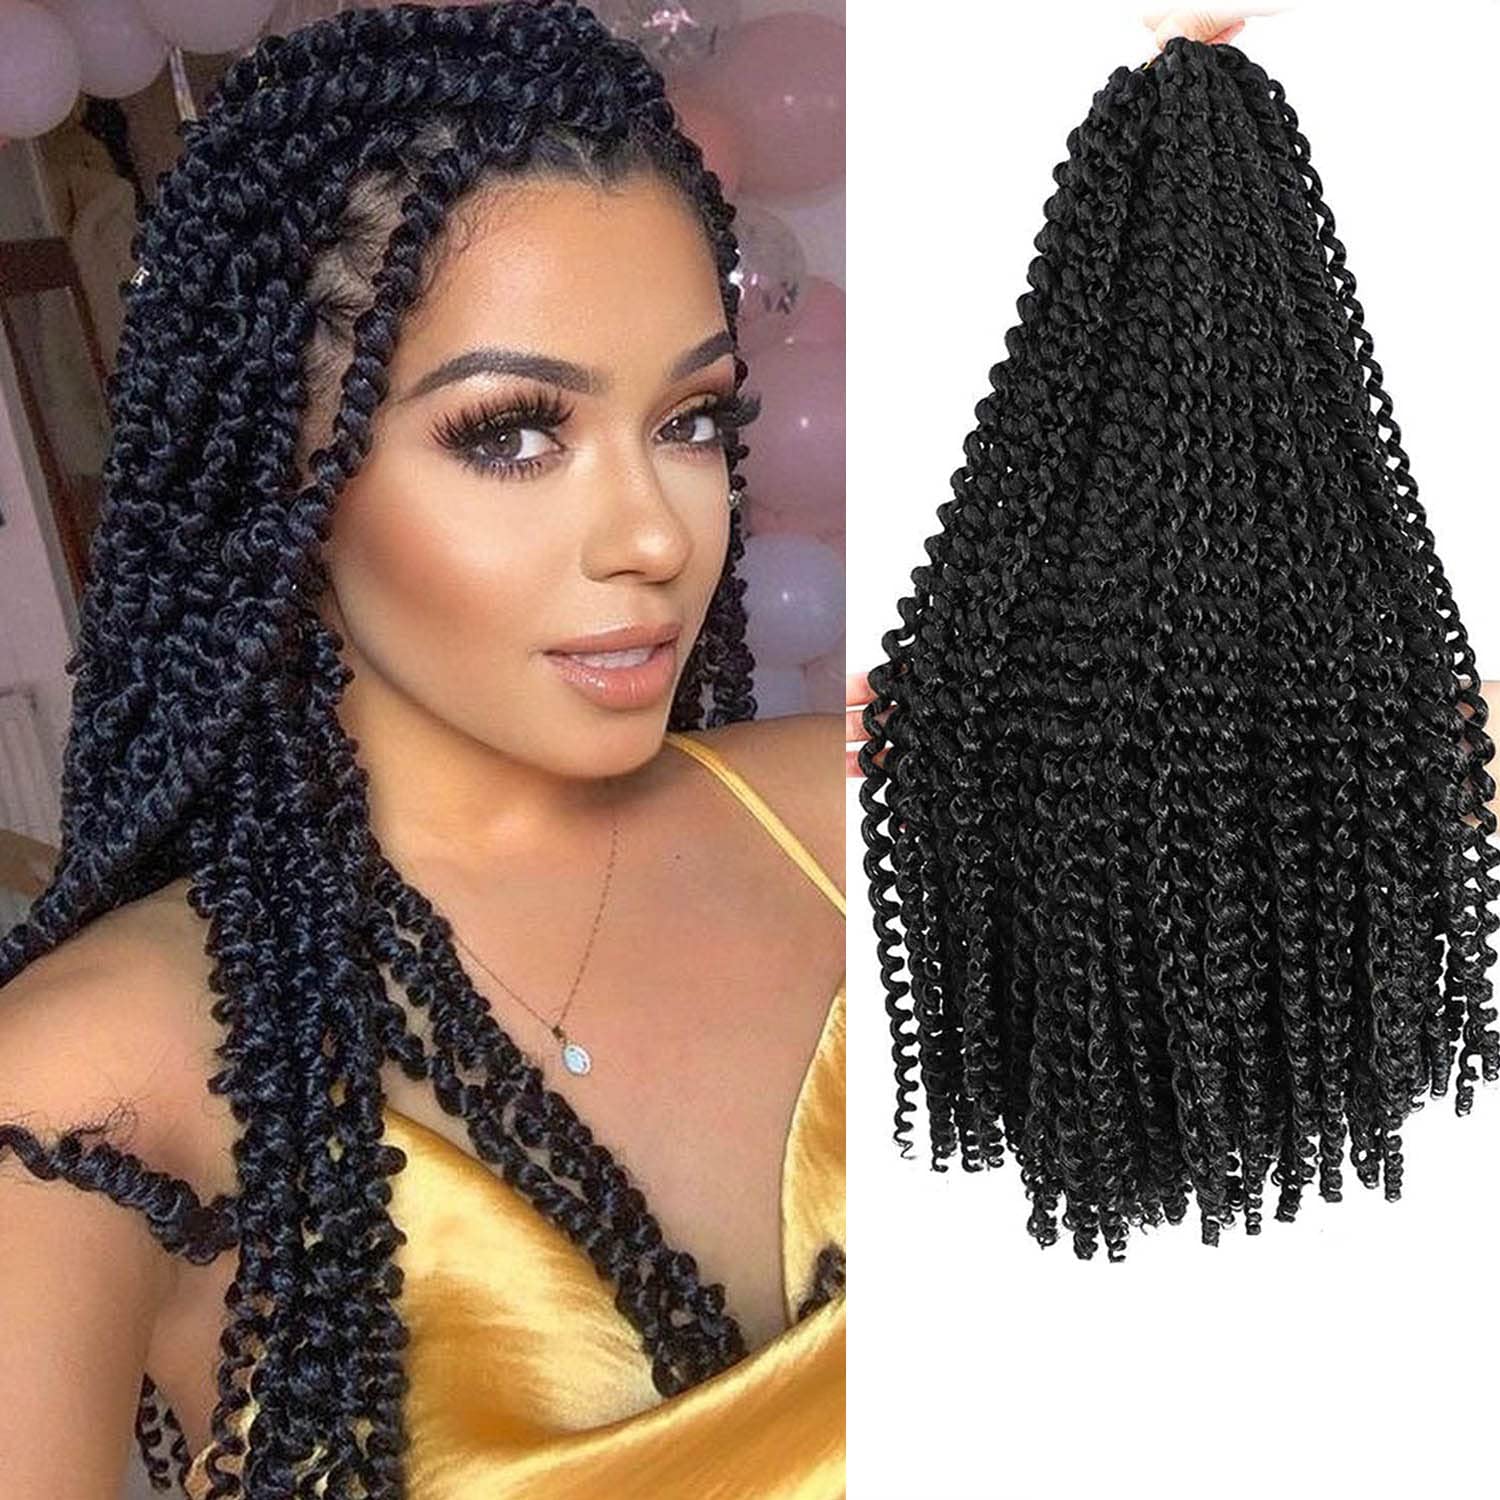 Passion Twist Hair 18 Inch 6 Packs Water Wave Braiding Hair for